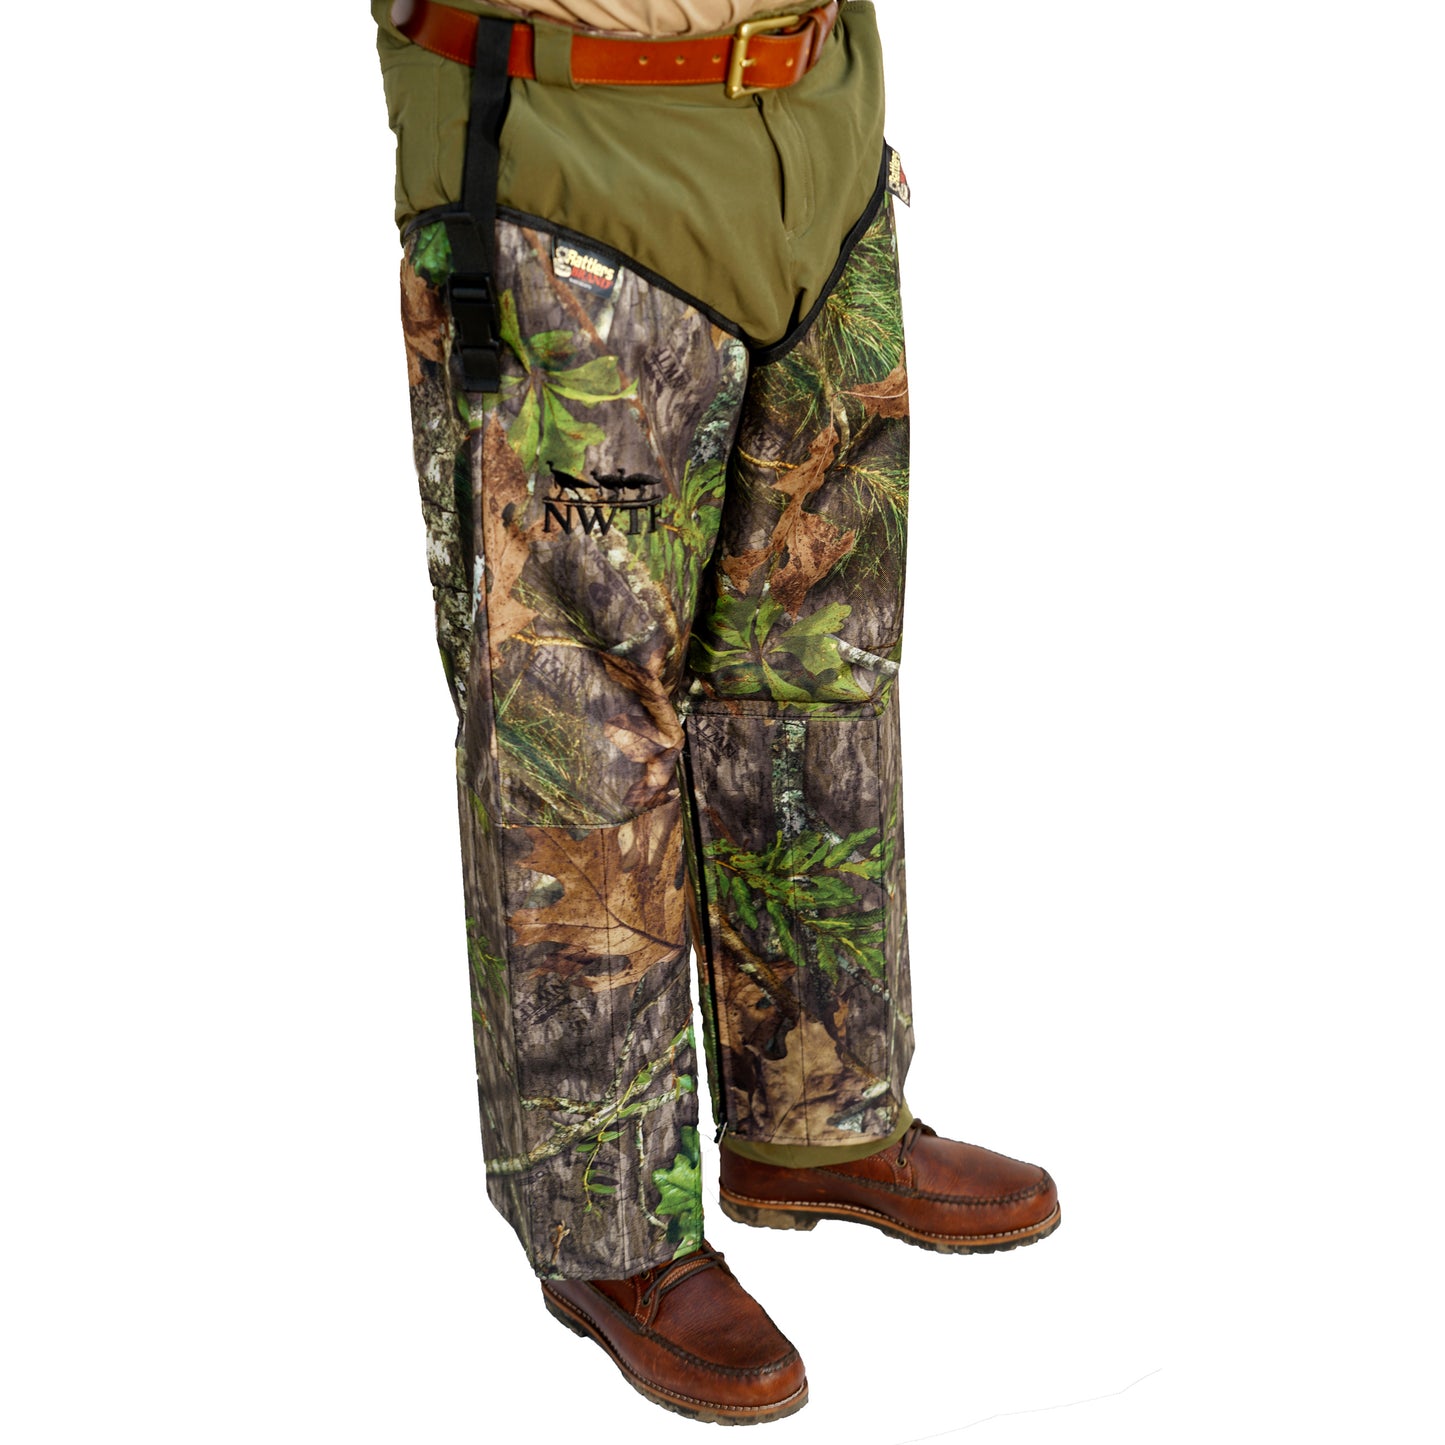 NWTF Snake Protection Chaps